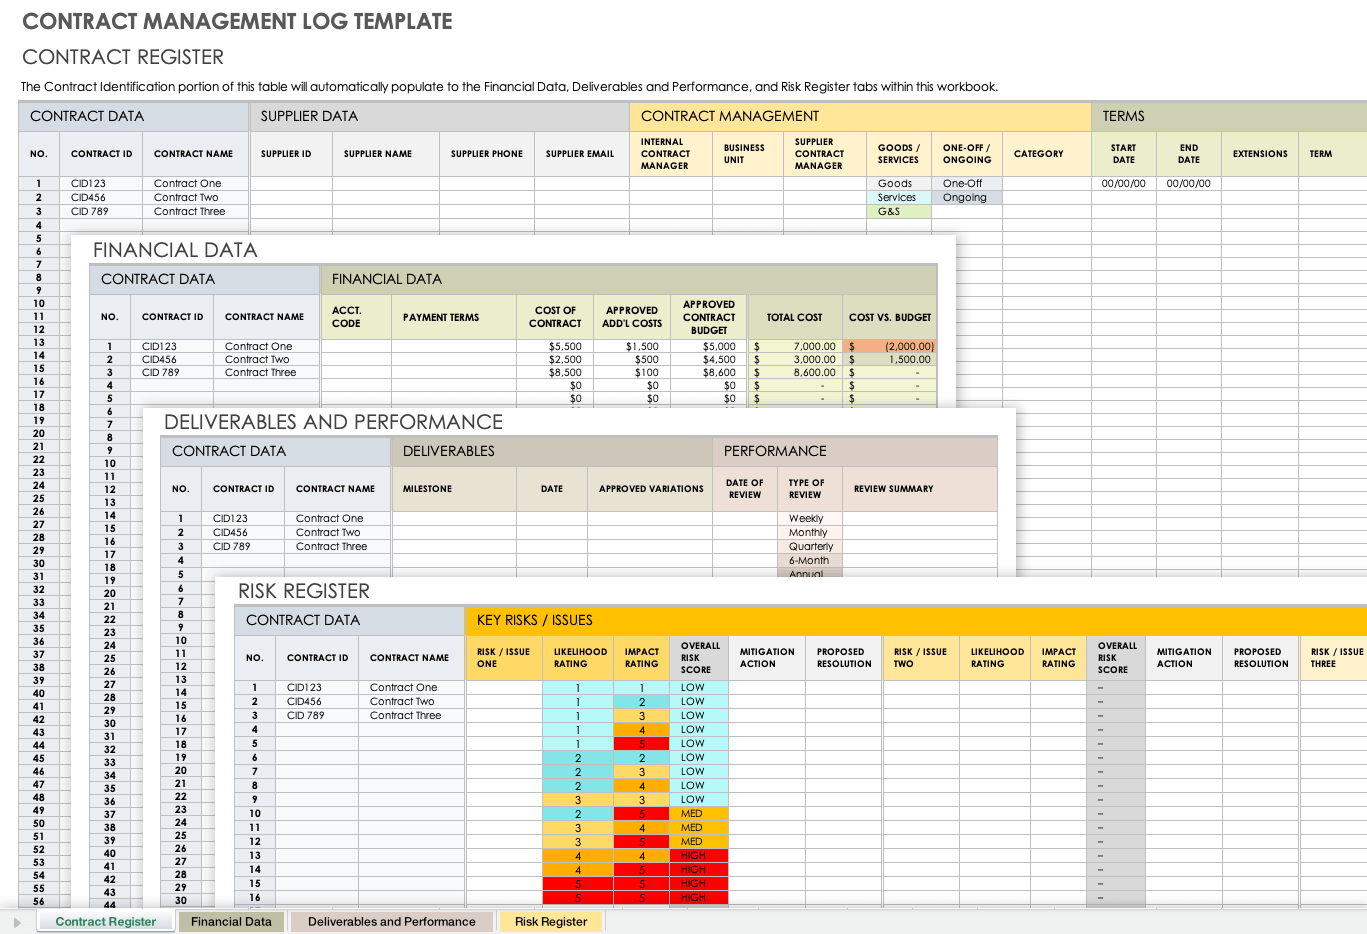 Contract Management Log Template